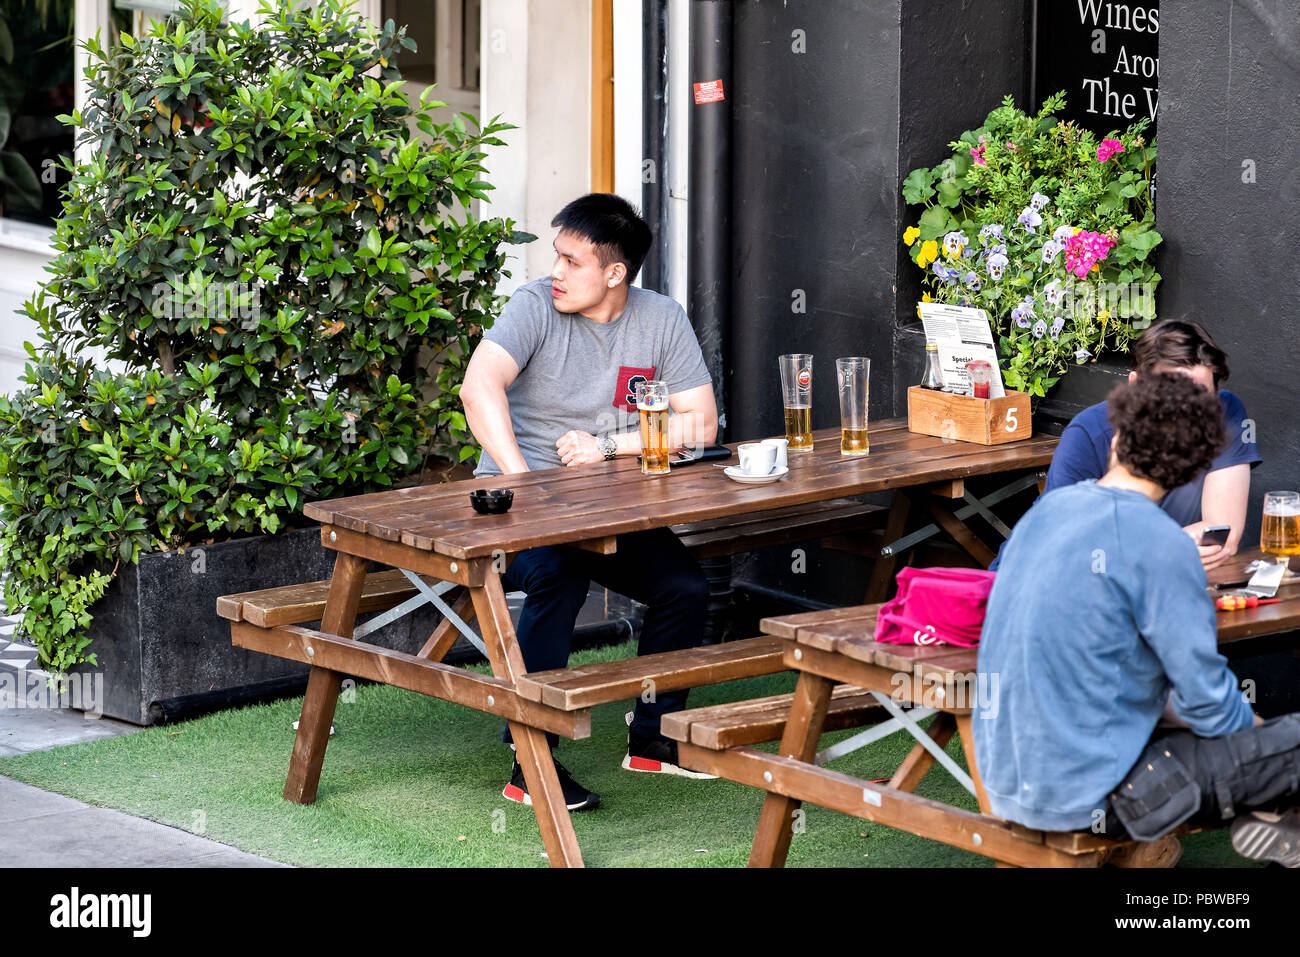 London, UK - June 22, 2018: People sitting on sidewalk street in England, by Sawyers Arms pub drinking pint of beer in glass with one young asian man, Stock Photo